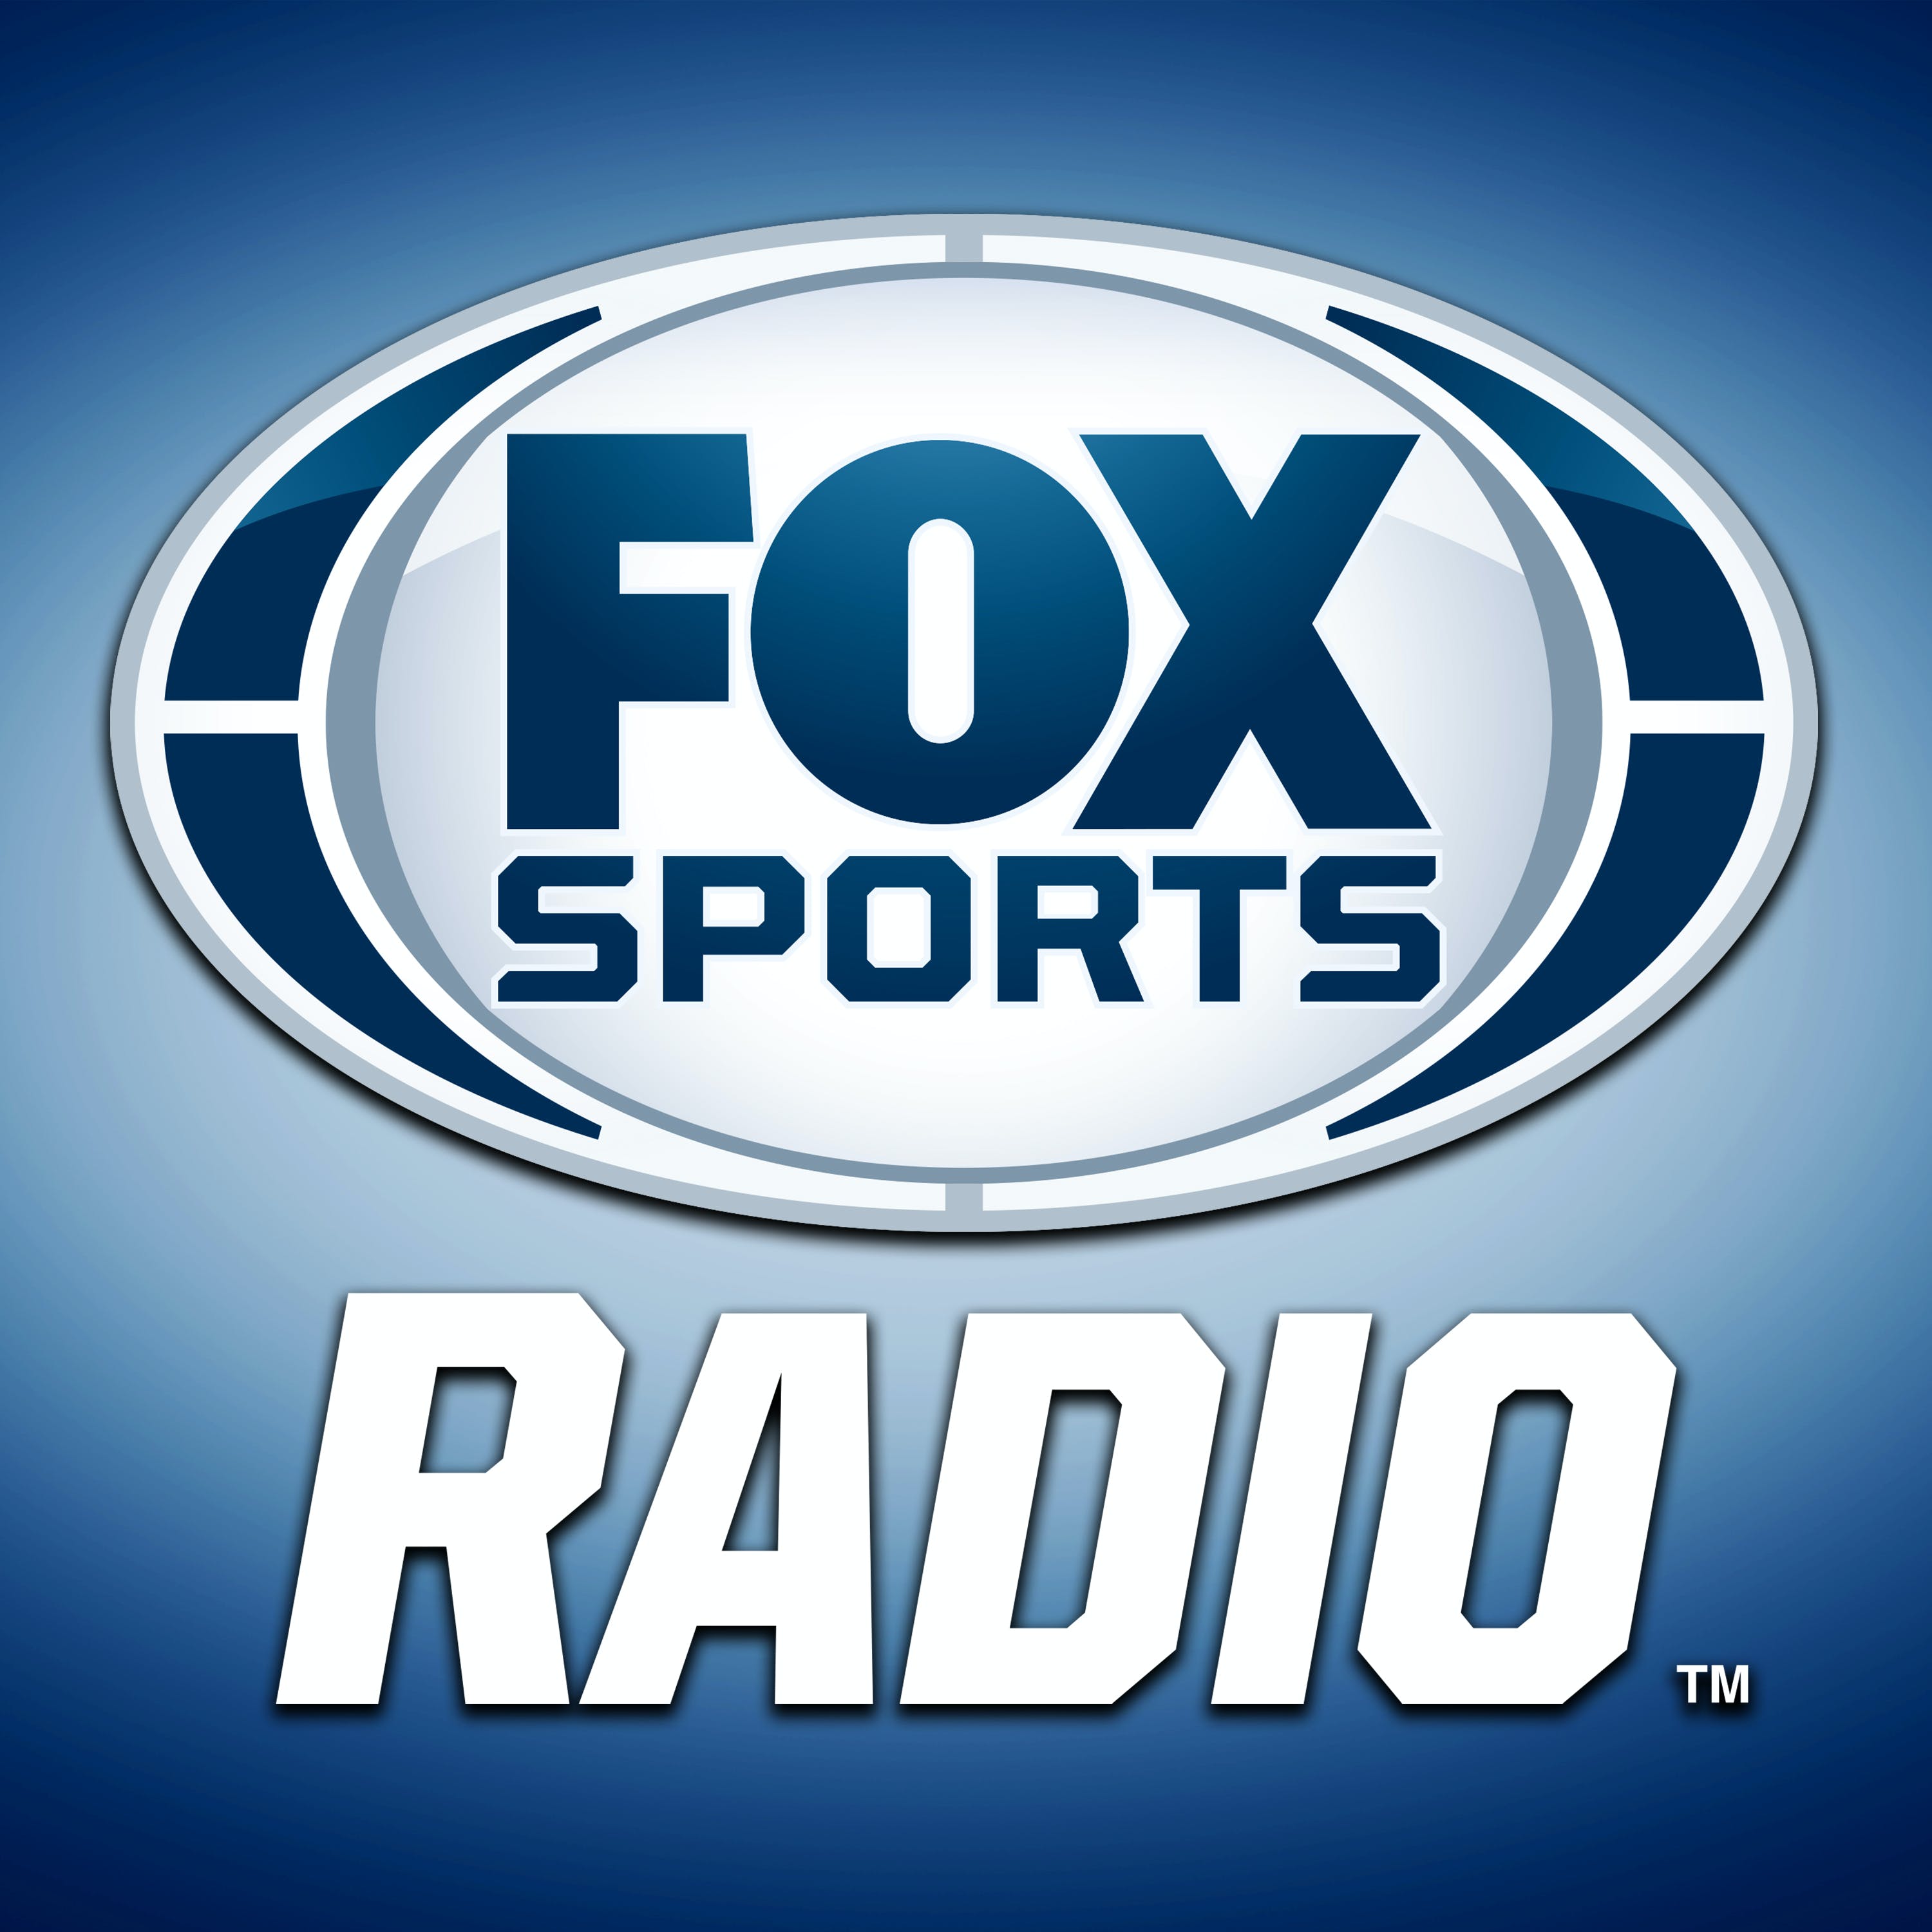 ♫ Fox Sports Radio Strong opinions on the biggest stories in sports Visit www.FOXSportsRadio and follow us on Twitter, Facebook, Instagram, TikTok and YouTube for highlights and great sports talk!